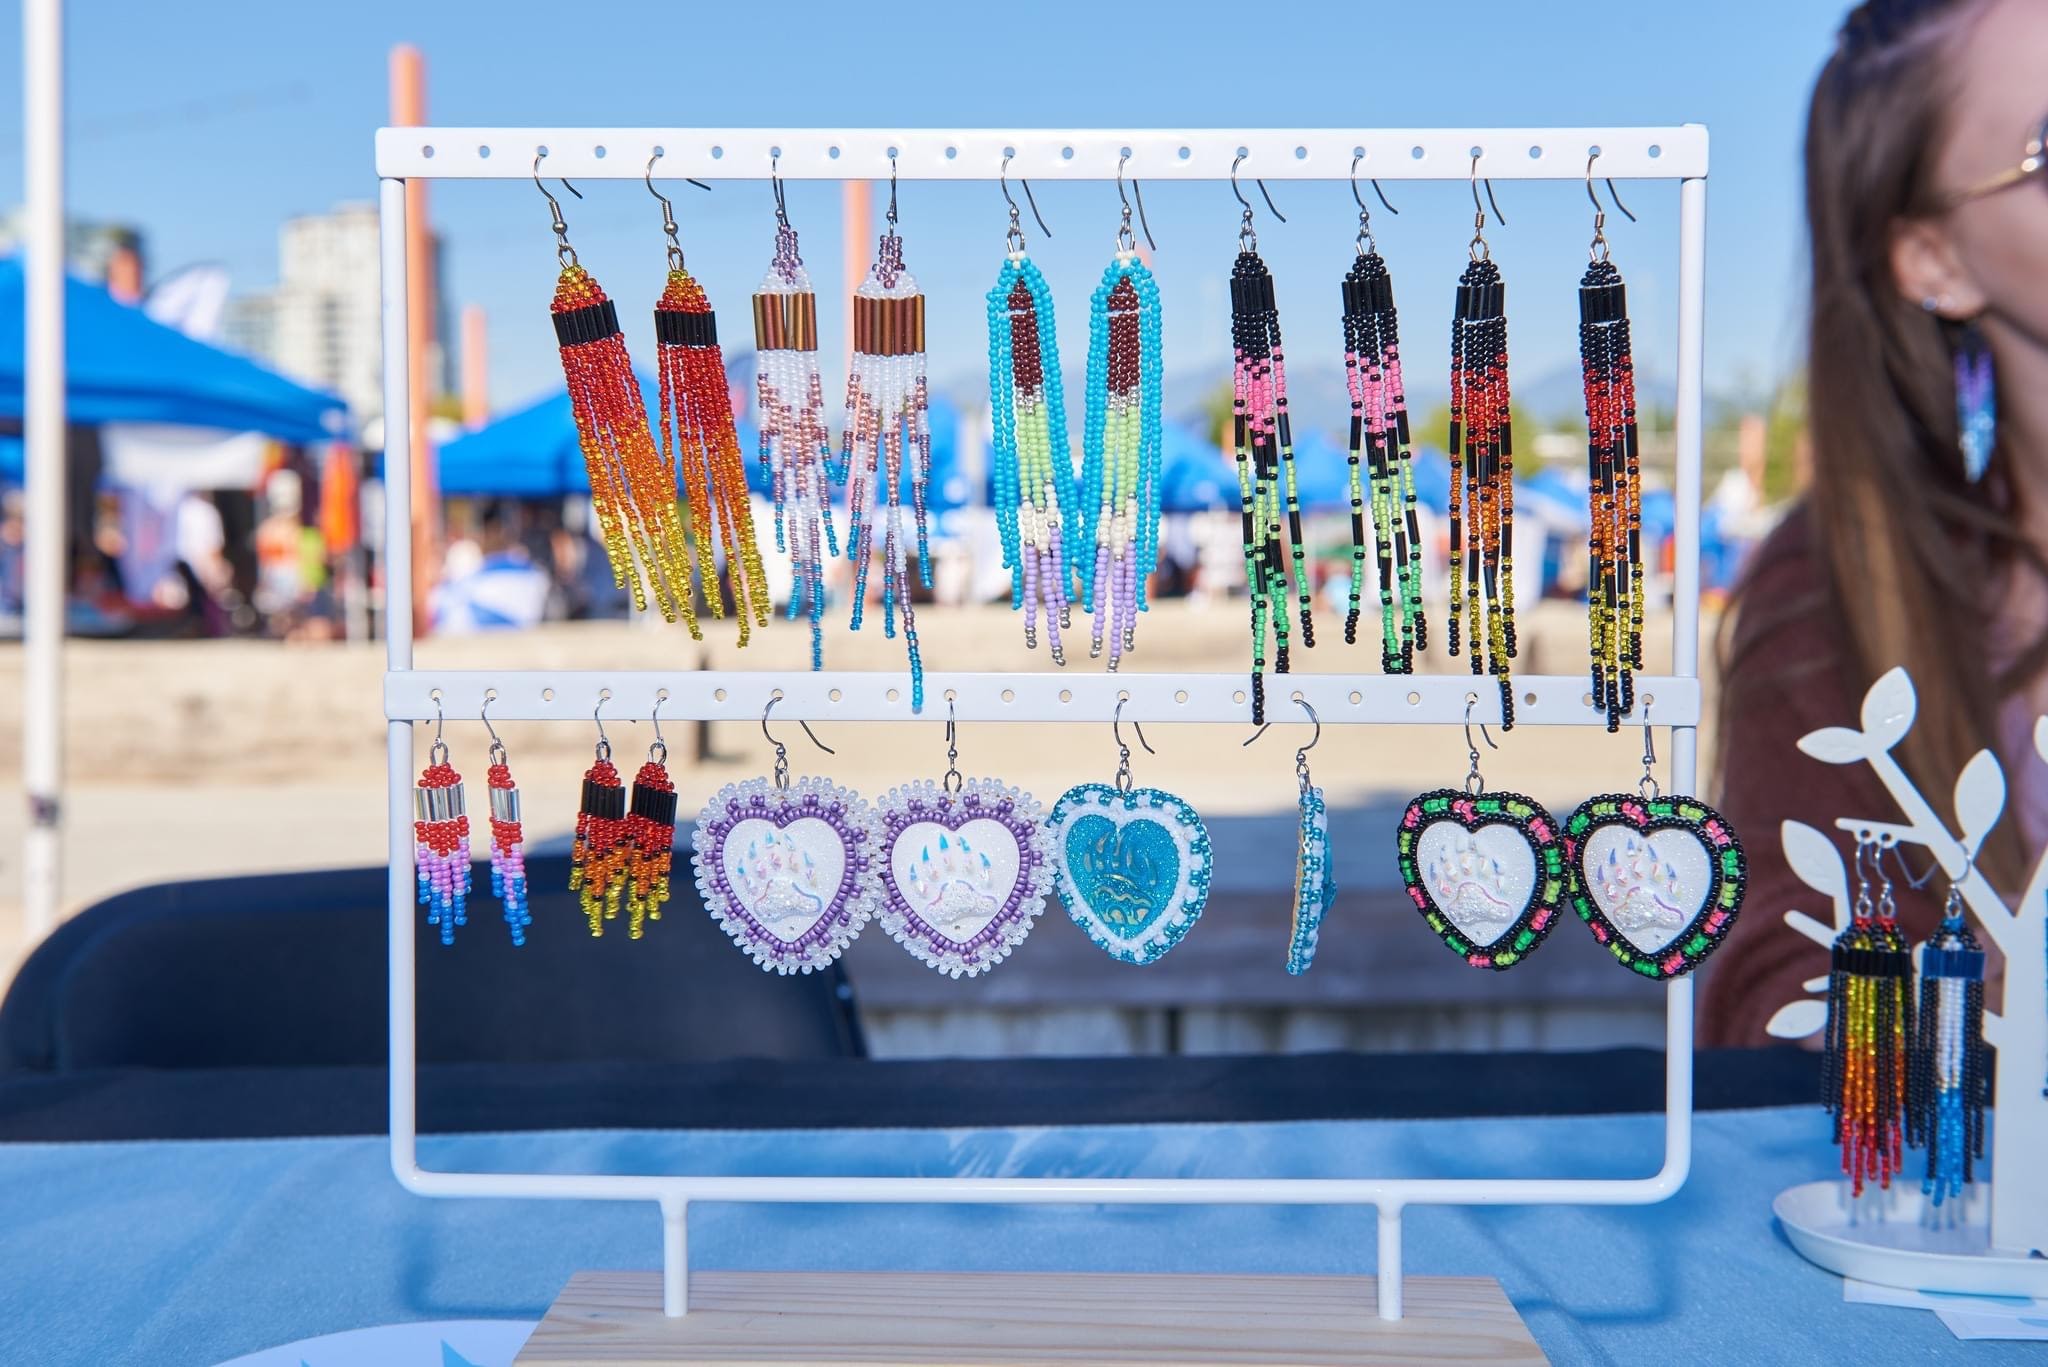 Various beaded fringe earrings of different patterns and colours hang on display at an outdoor vendor market.